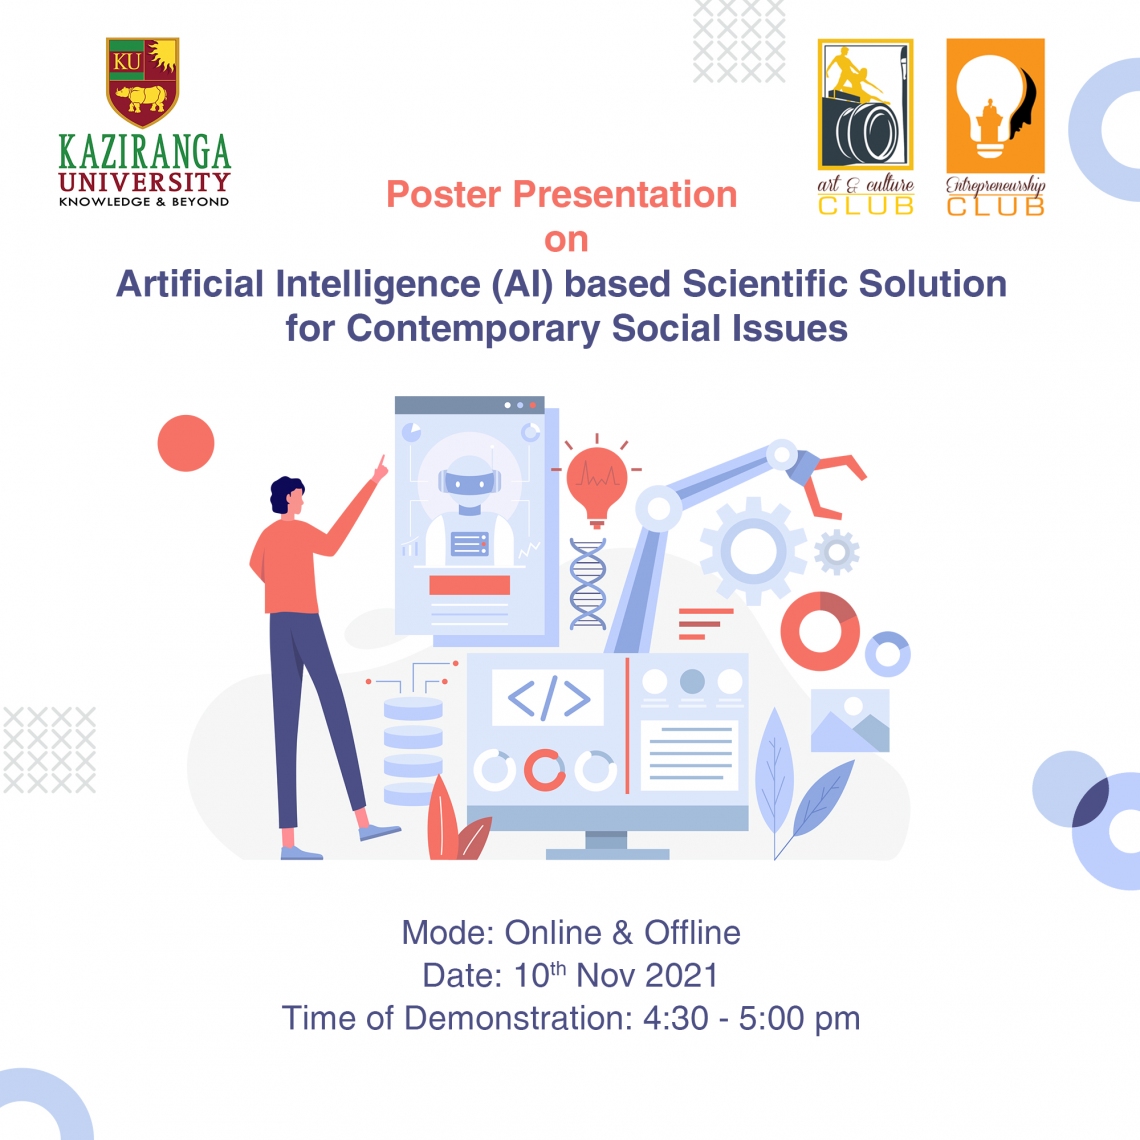 Poster Presentation on Artificial Intelligence (AI) based on scientific solutions for contemporary social issues